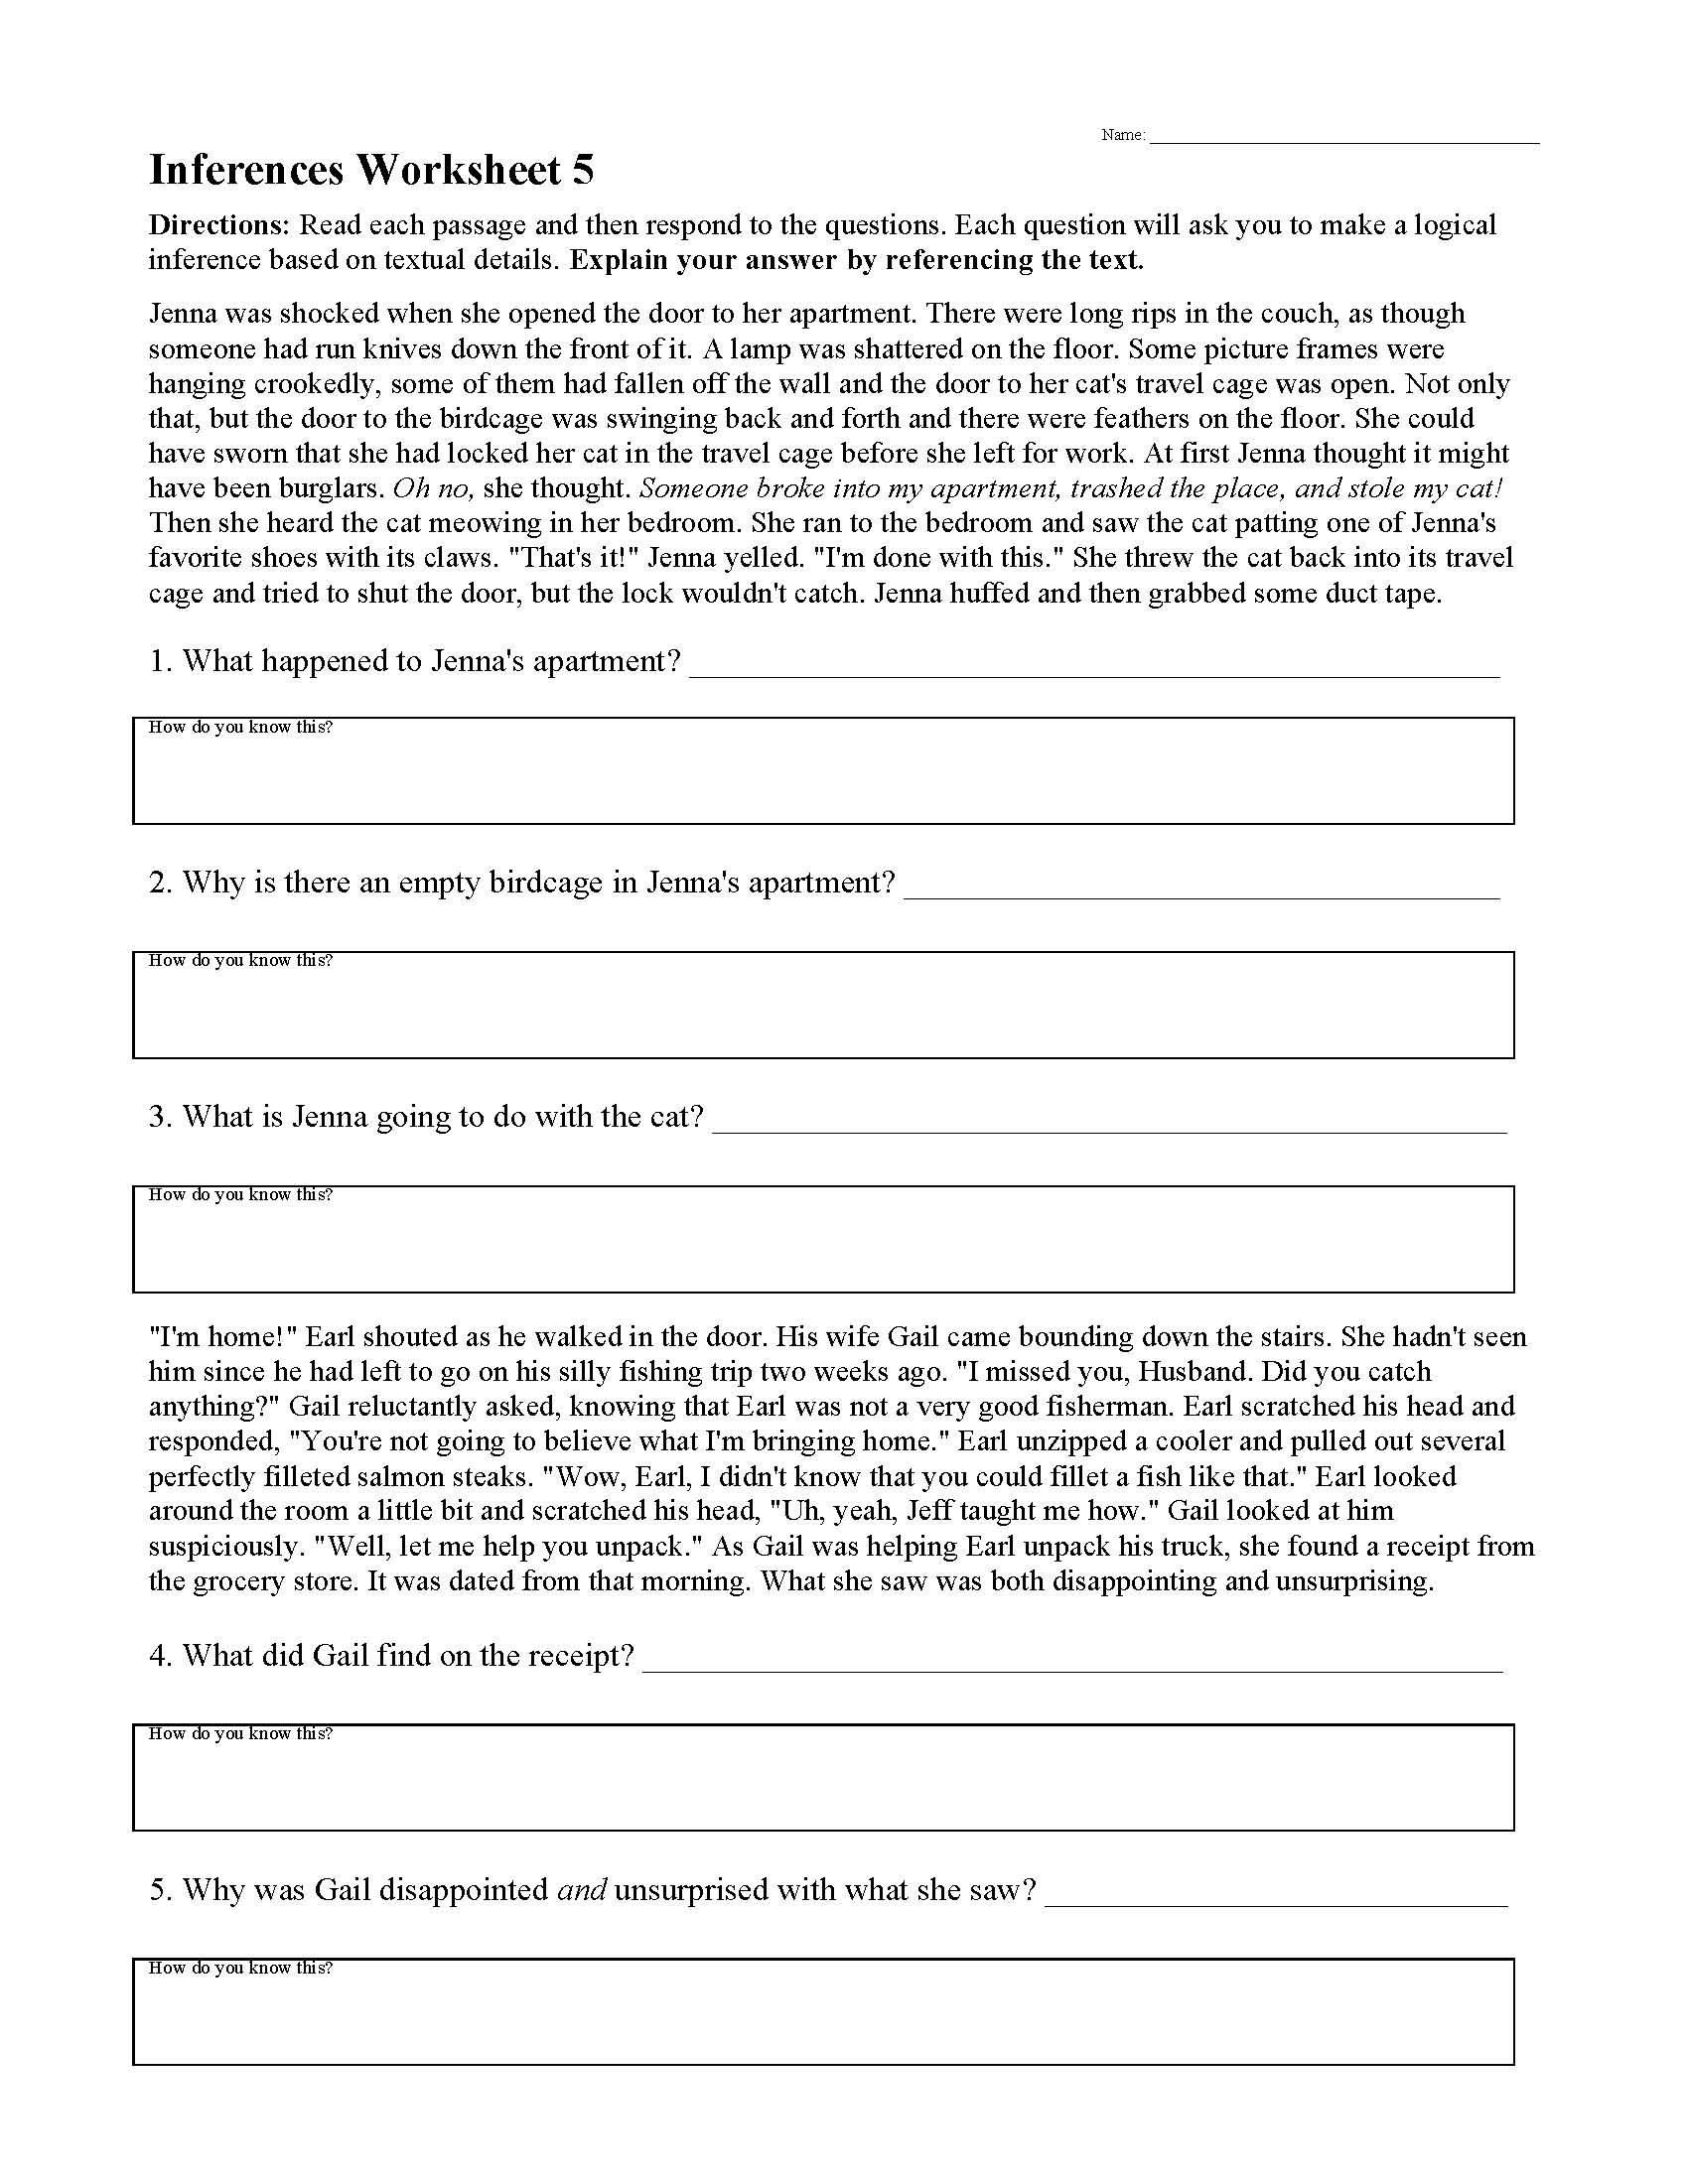 Inferences Worksheet 5 Reading Activity